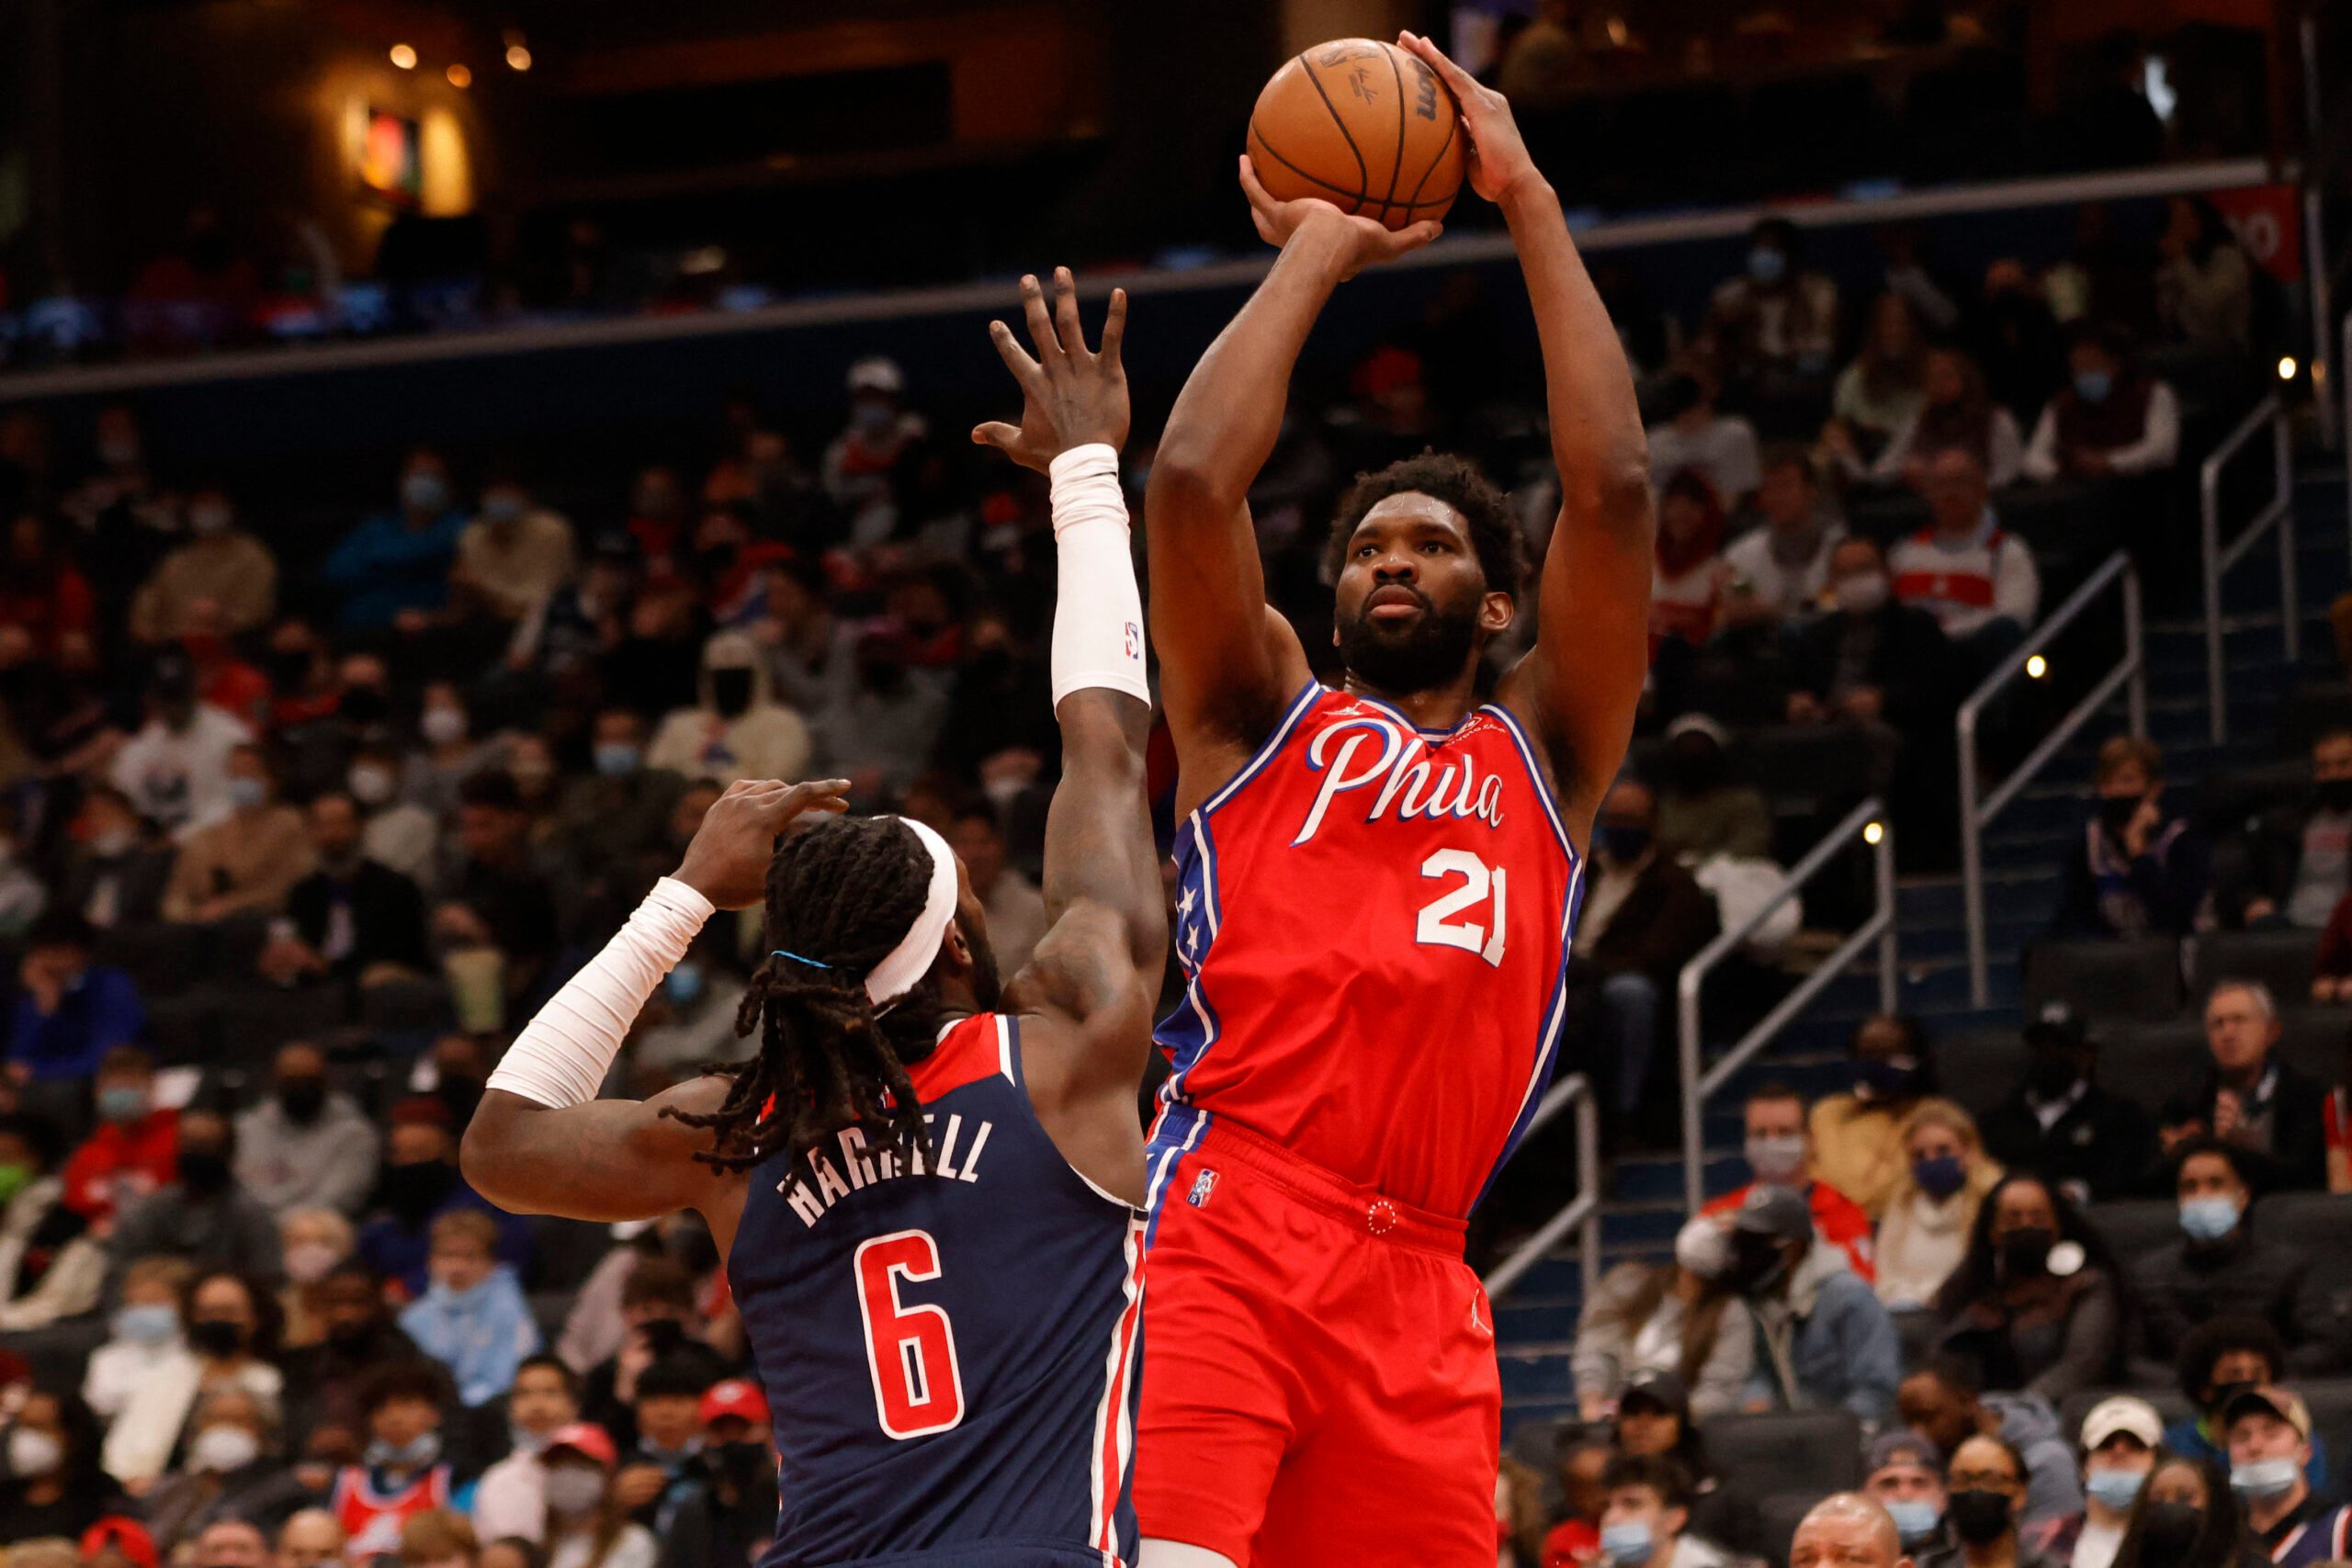 Joel Embiid’s 36 leads Sixers past Wizards